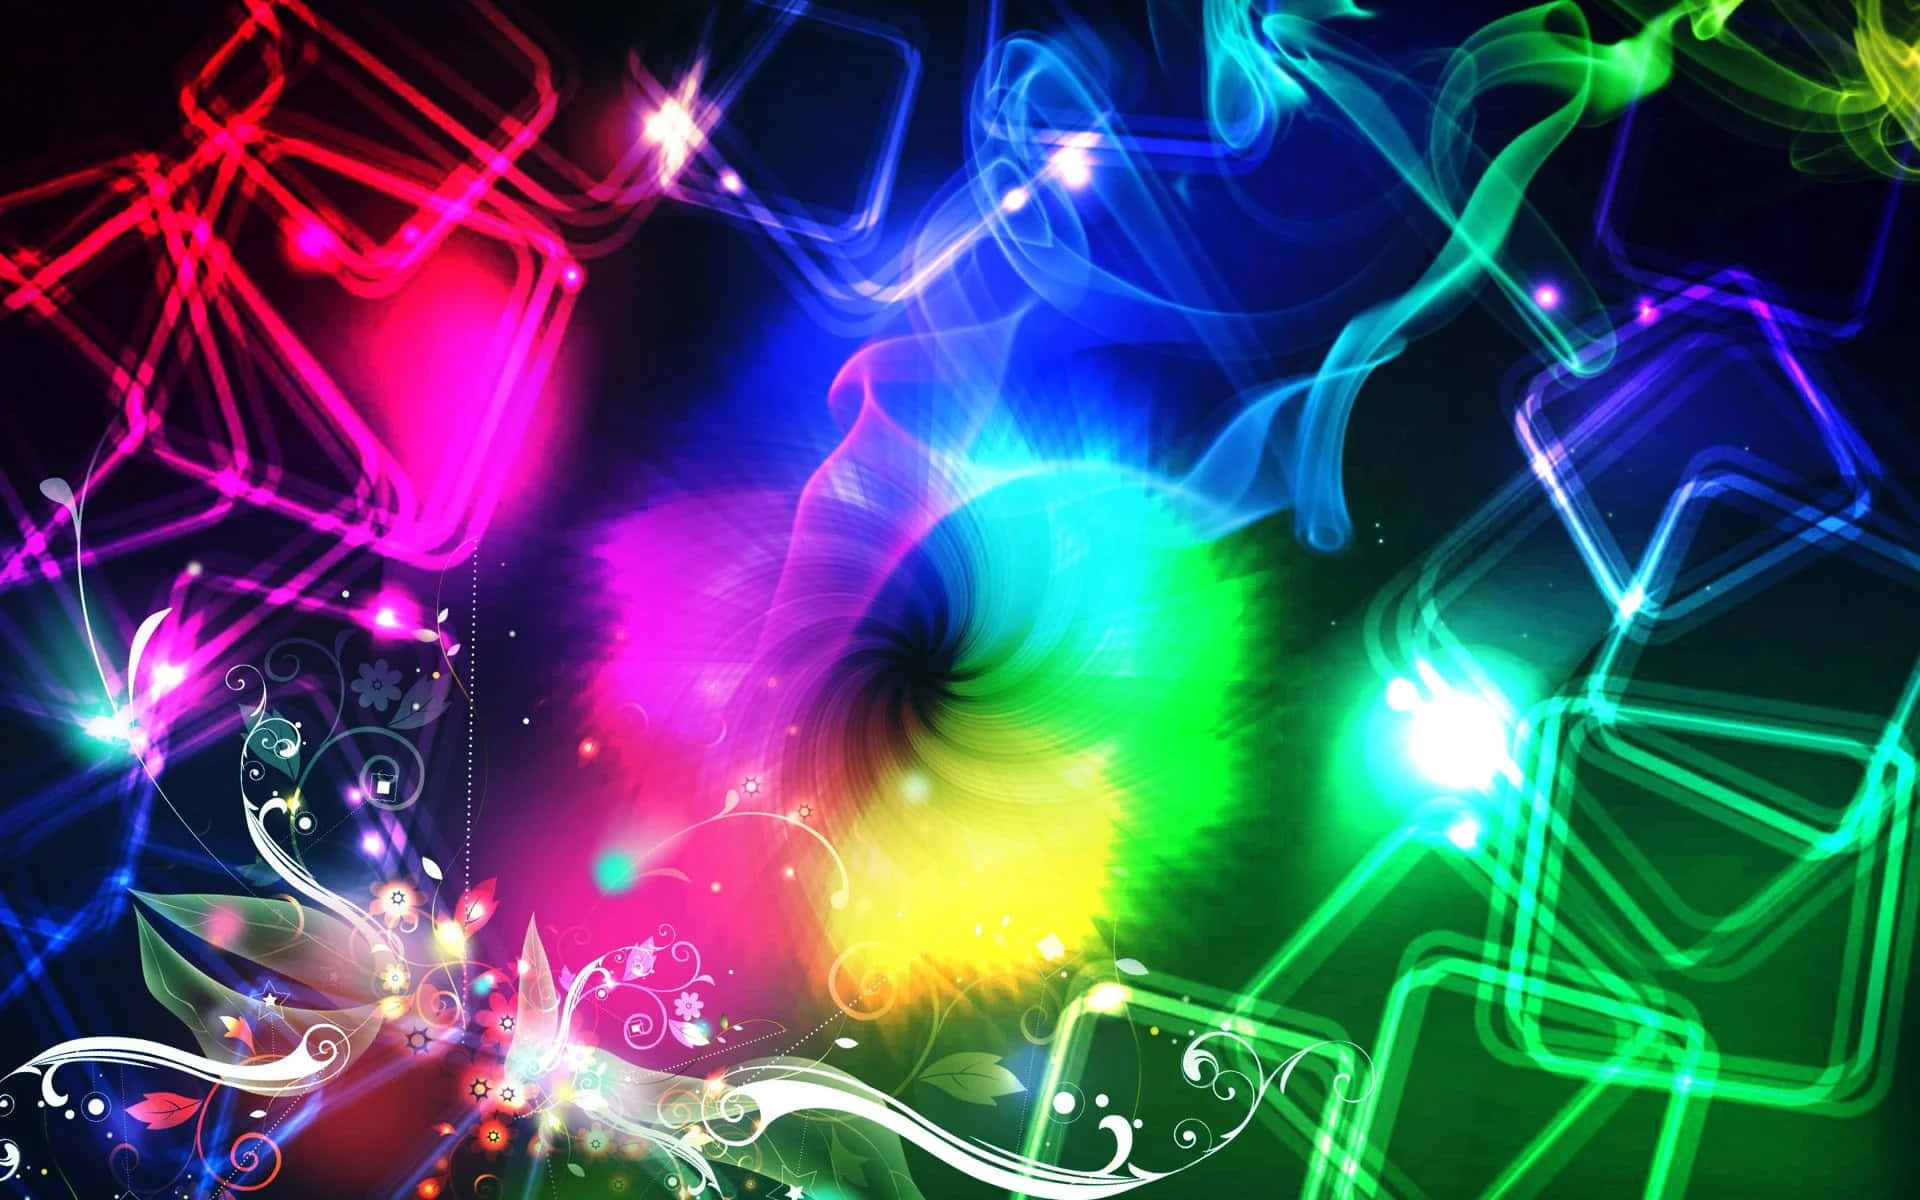 Download Colorful Abstract Background With Colorful Lights | Wallpapers.com